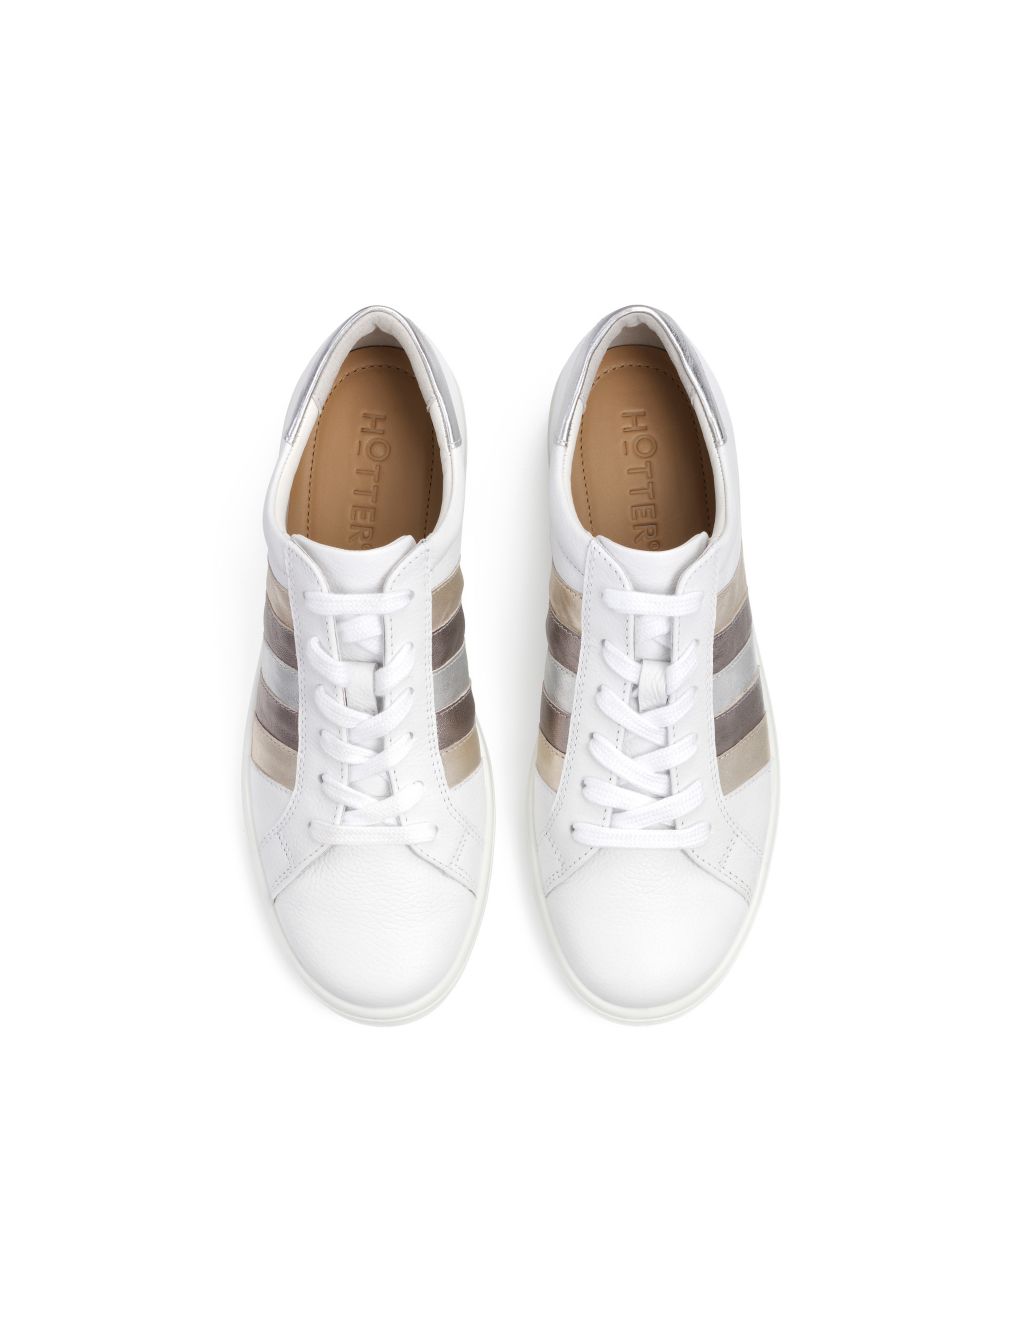 Switch Wide Fit Lace Up Trainers image 3